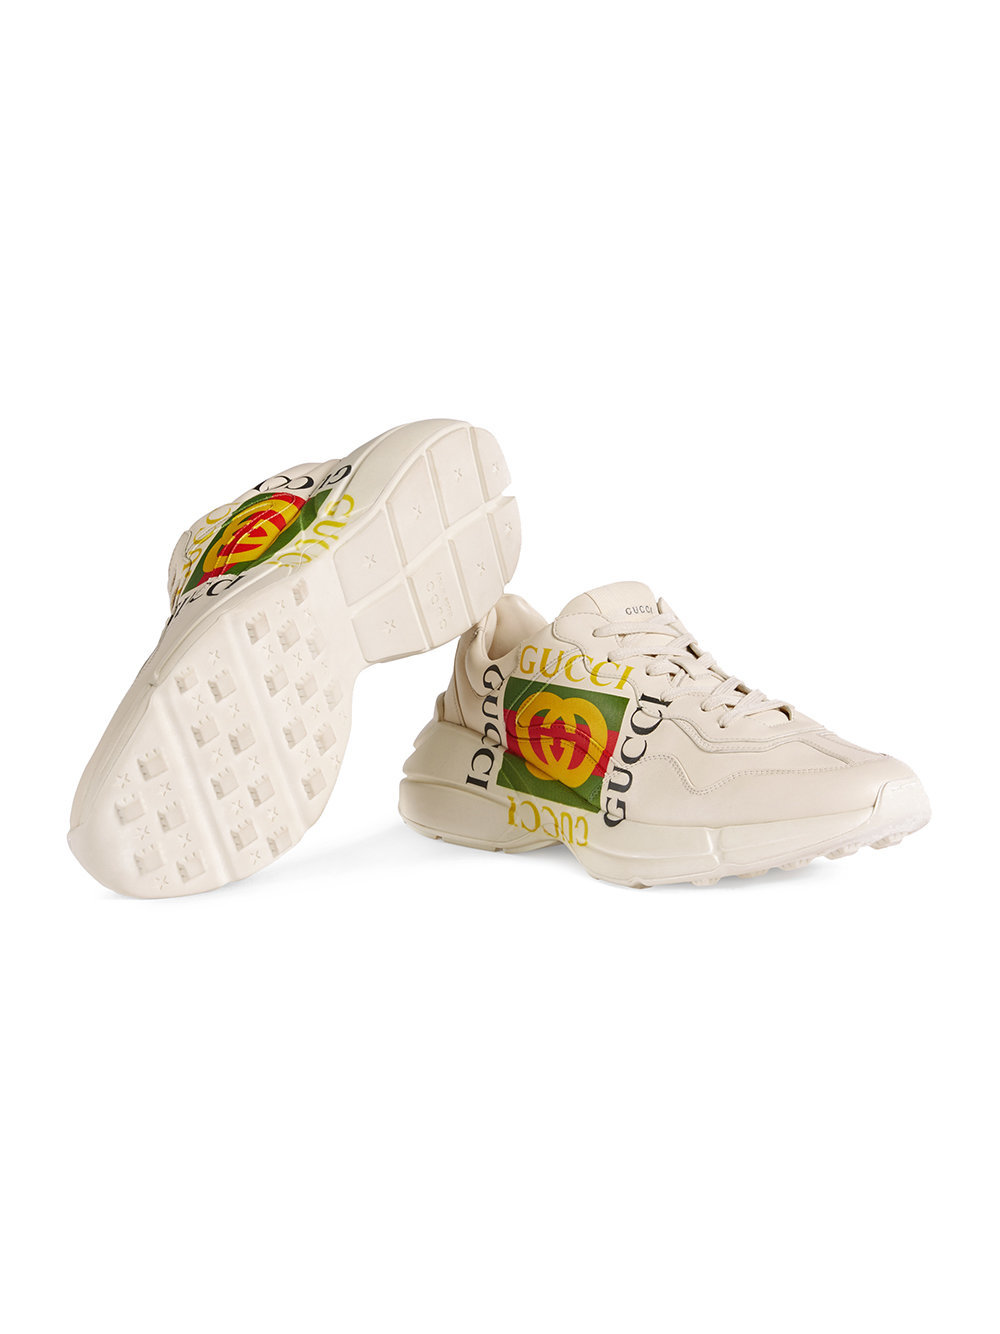 Shop GUCCI Street Style Leather Logo Outlet Sneakers by Lutti